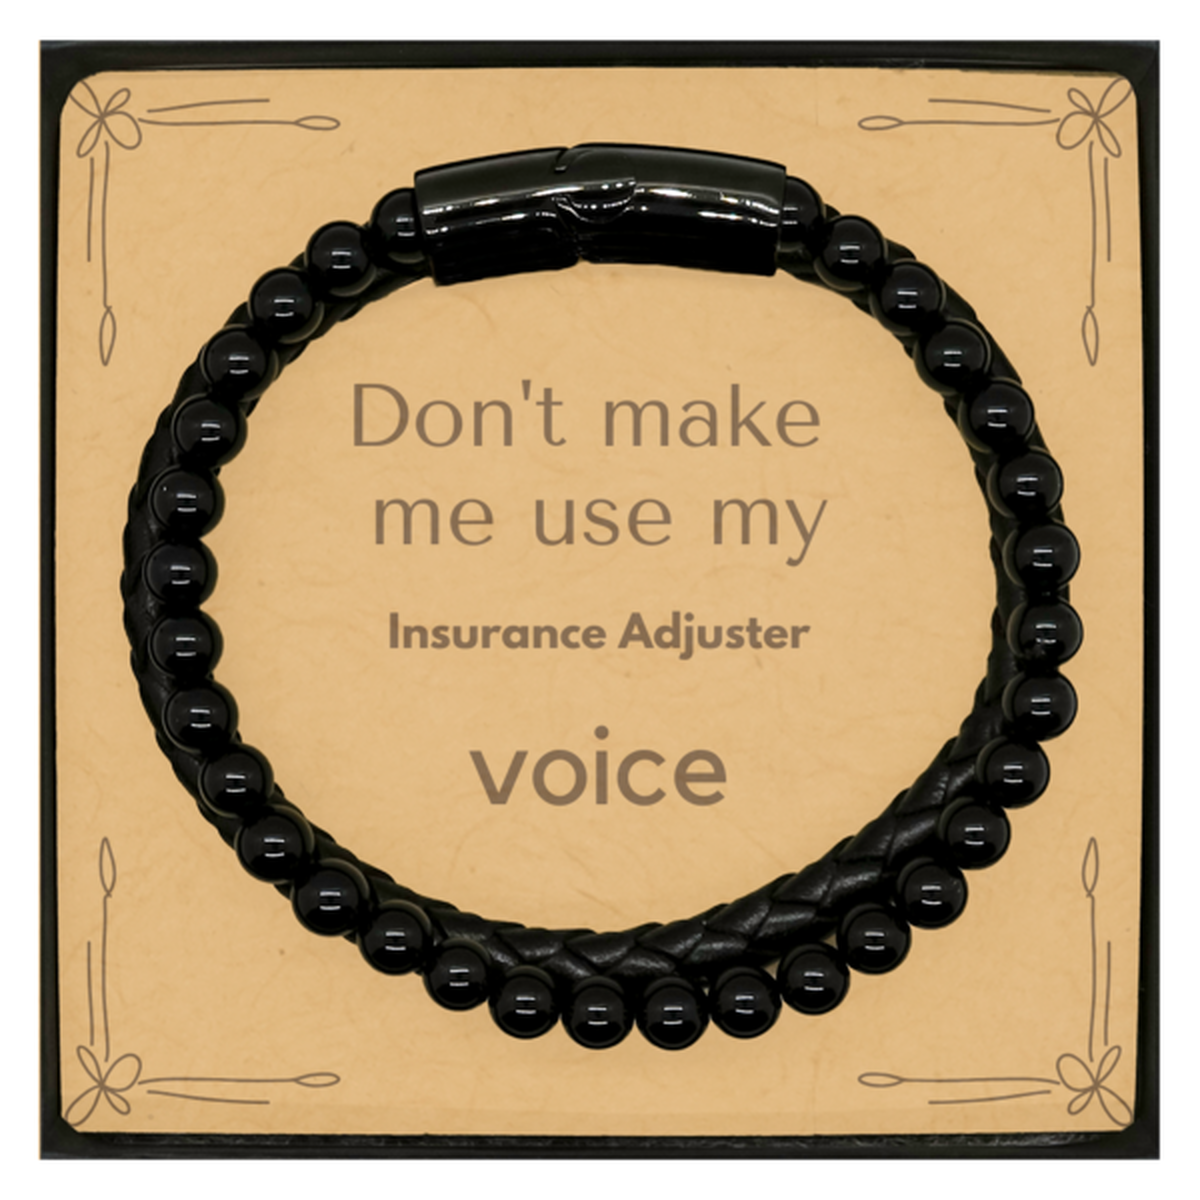 Don't make me use my Insurance Adjuster voice, Sarcasm Insurance Adjuster Card Gifts, Christmas Insurance Adjuster Stone Leather Bracelets Birthday Unique Gifts For Insurance Adjuster Coworkers, Men, Women, Colleague, Friends